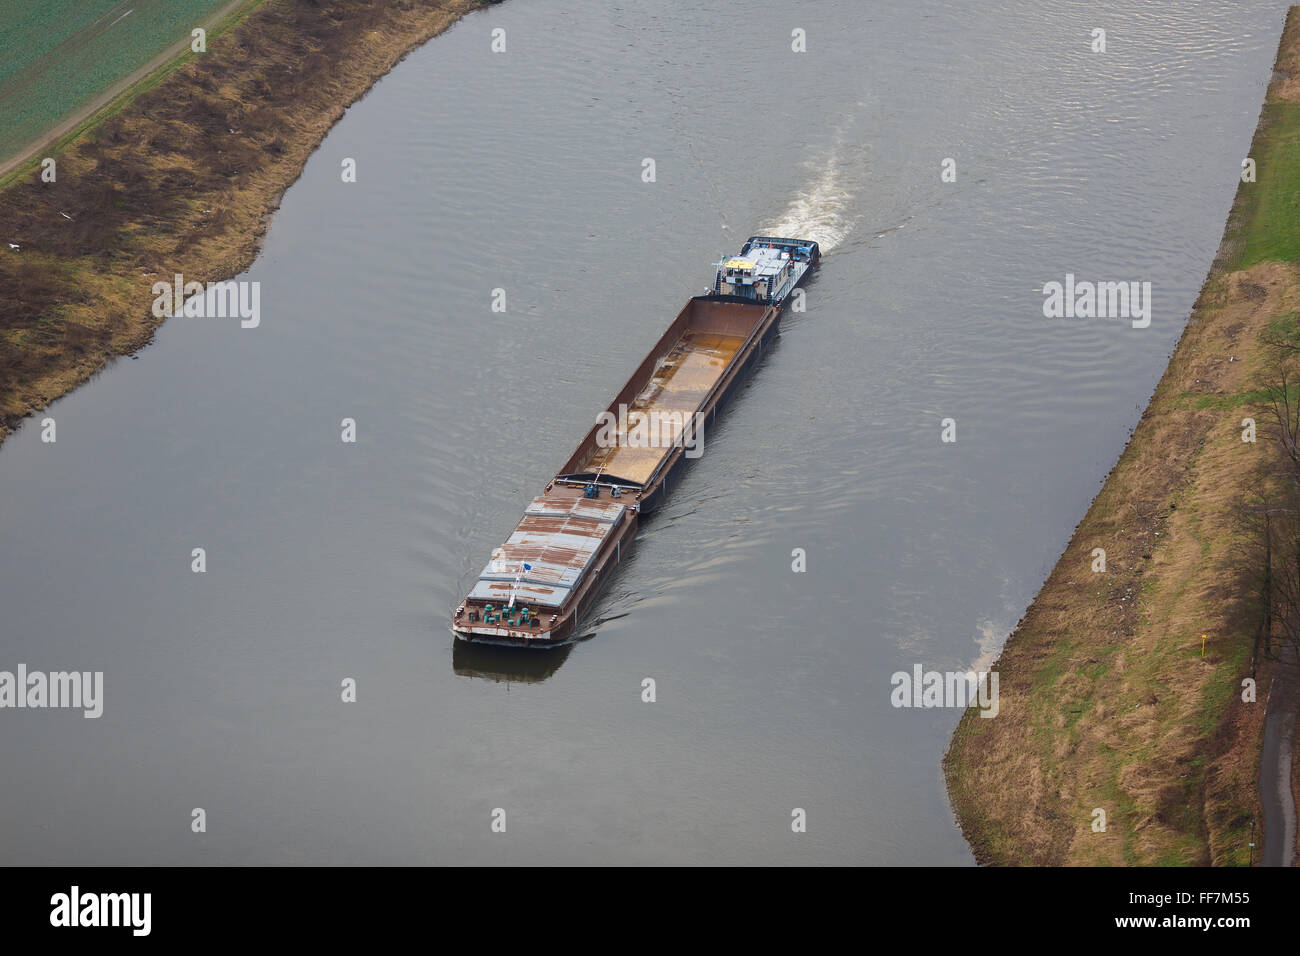 Barge floating on the Elbe river in Swiss Saxony, Germany Stock Photo